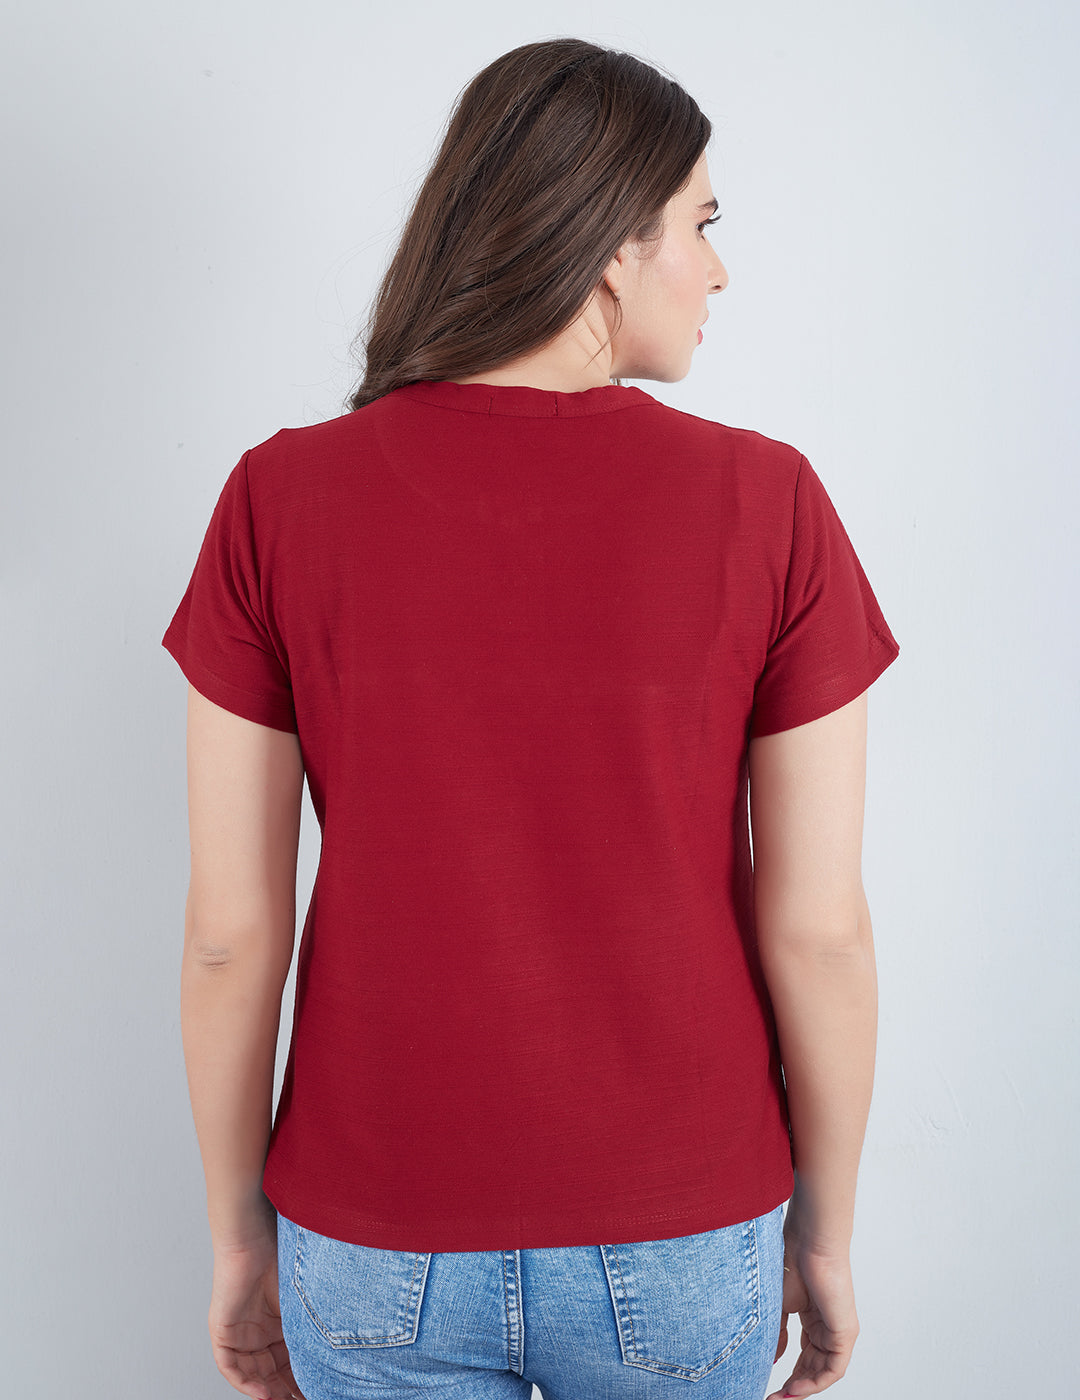 Stylish Maroon Plain Cotton Short T-shirts For Women Online In India